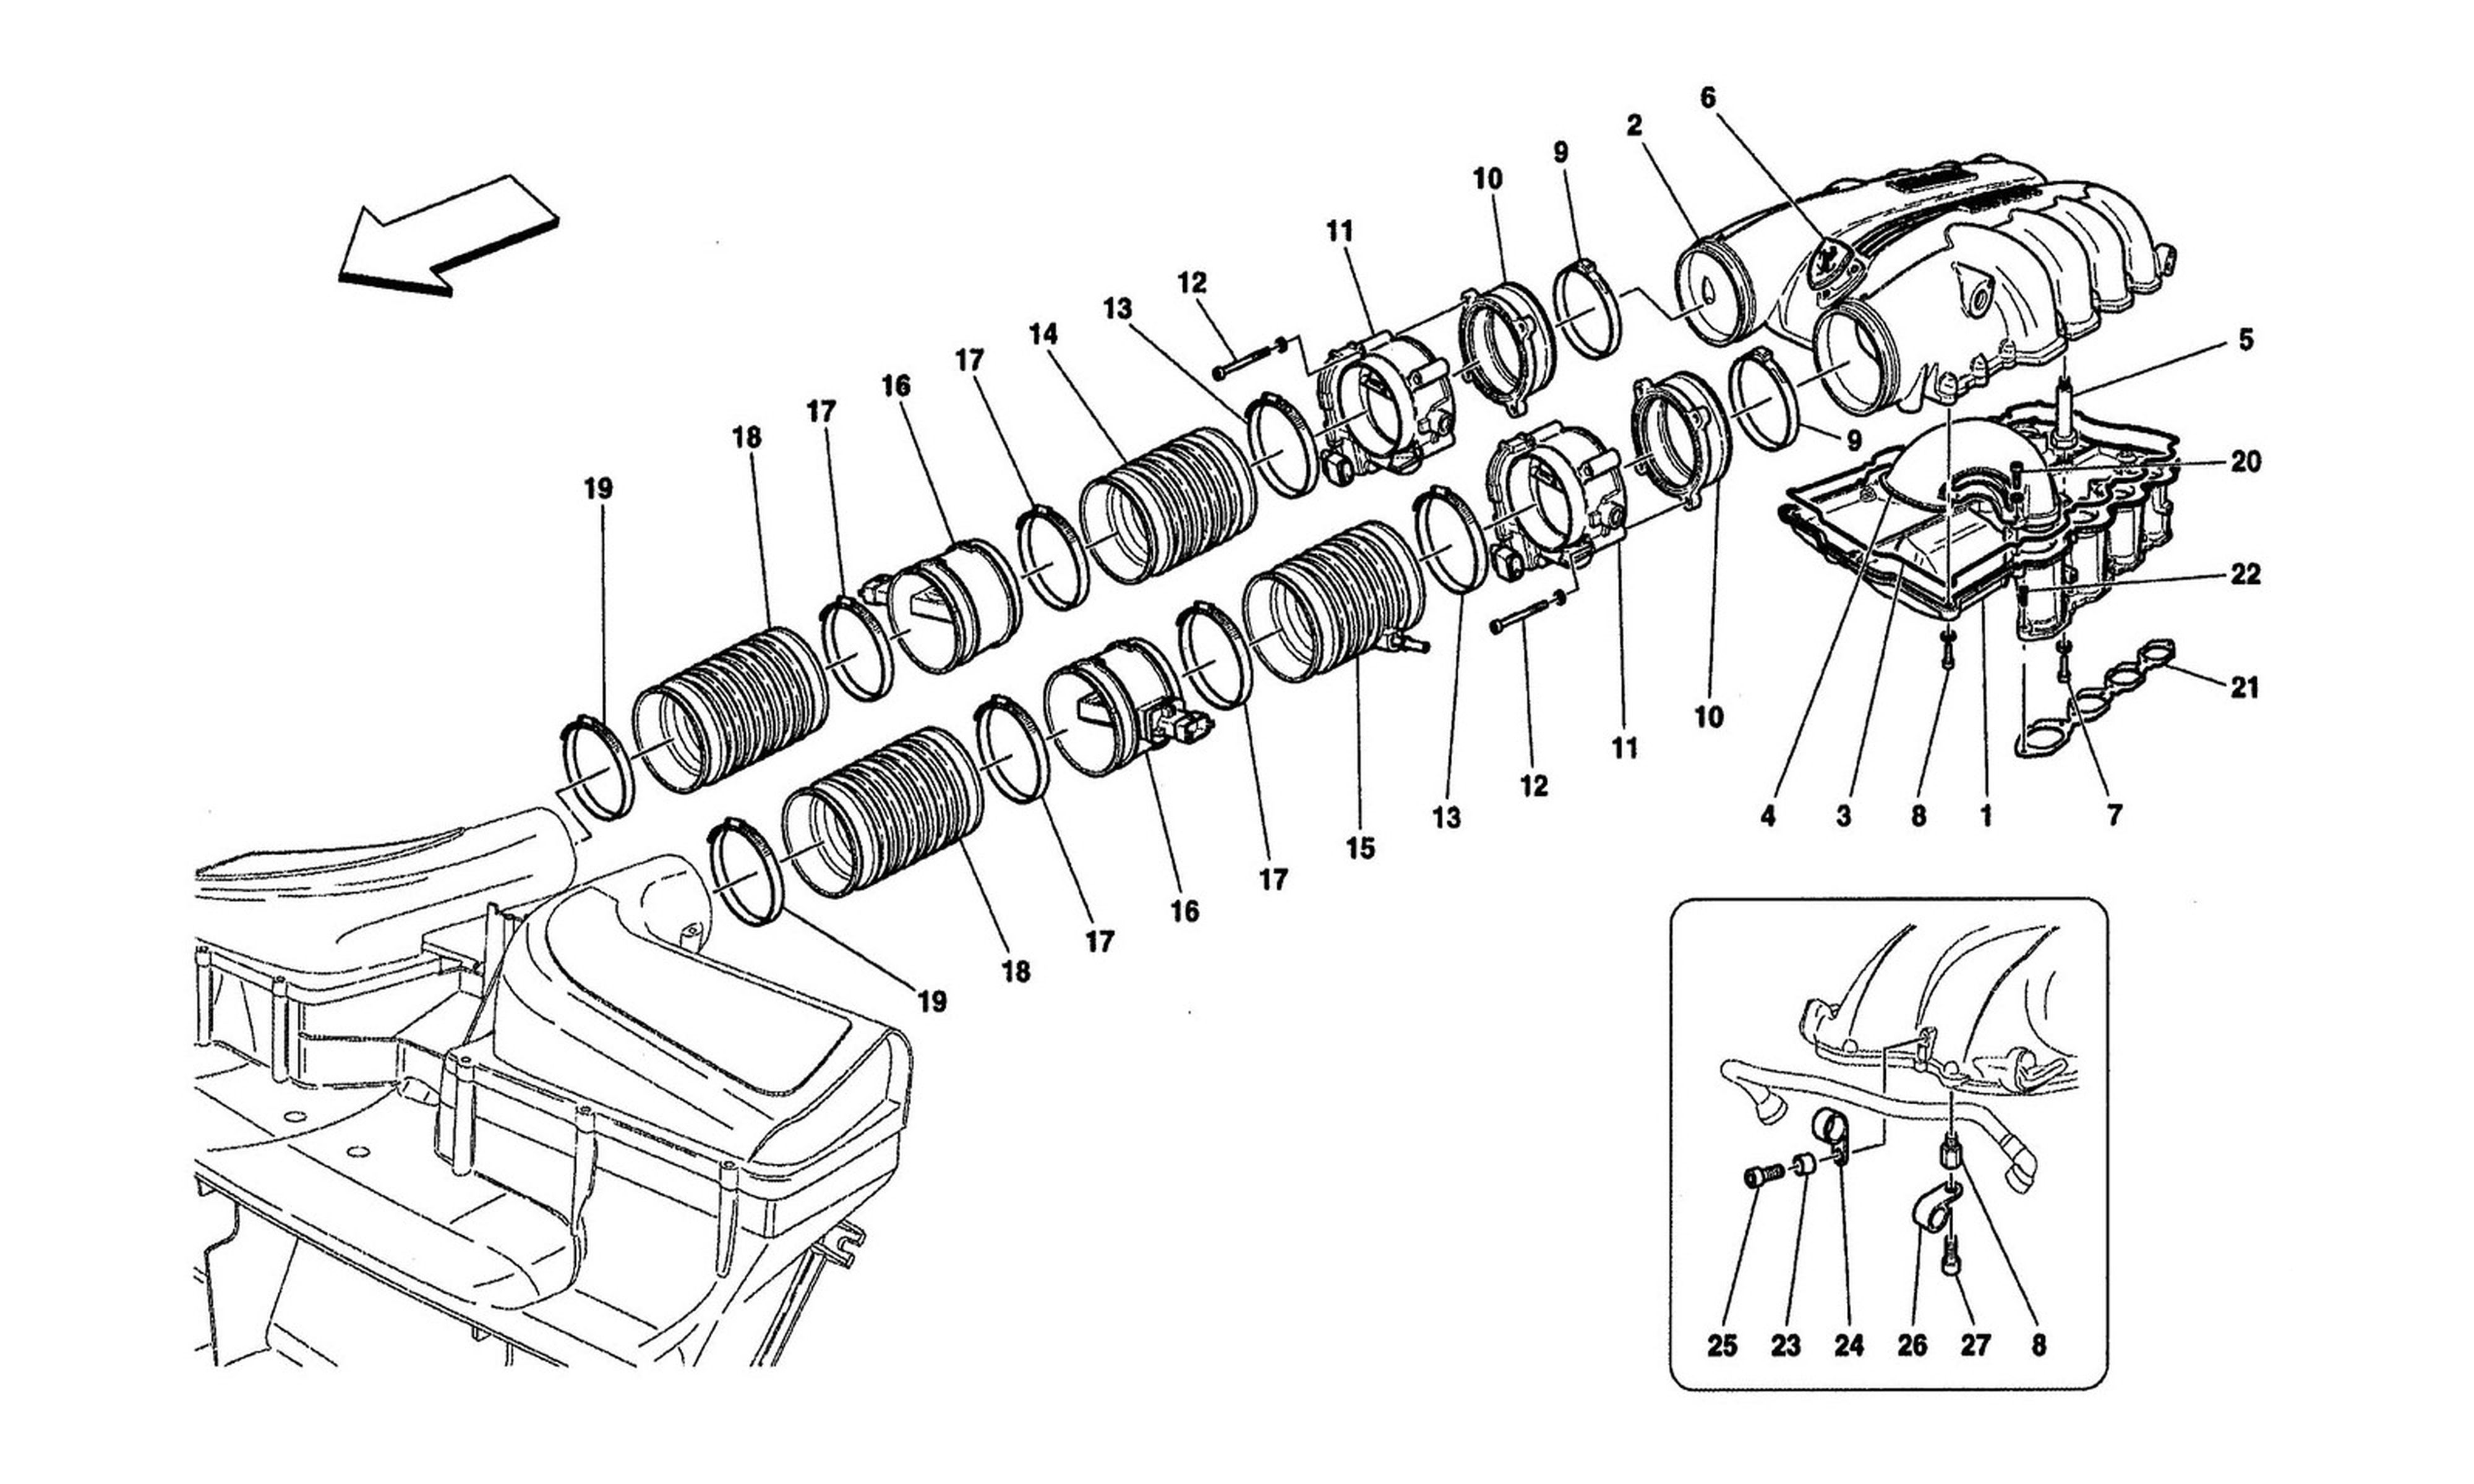 Schematic: Intake Manifold And Throttle Body